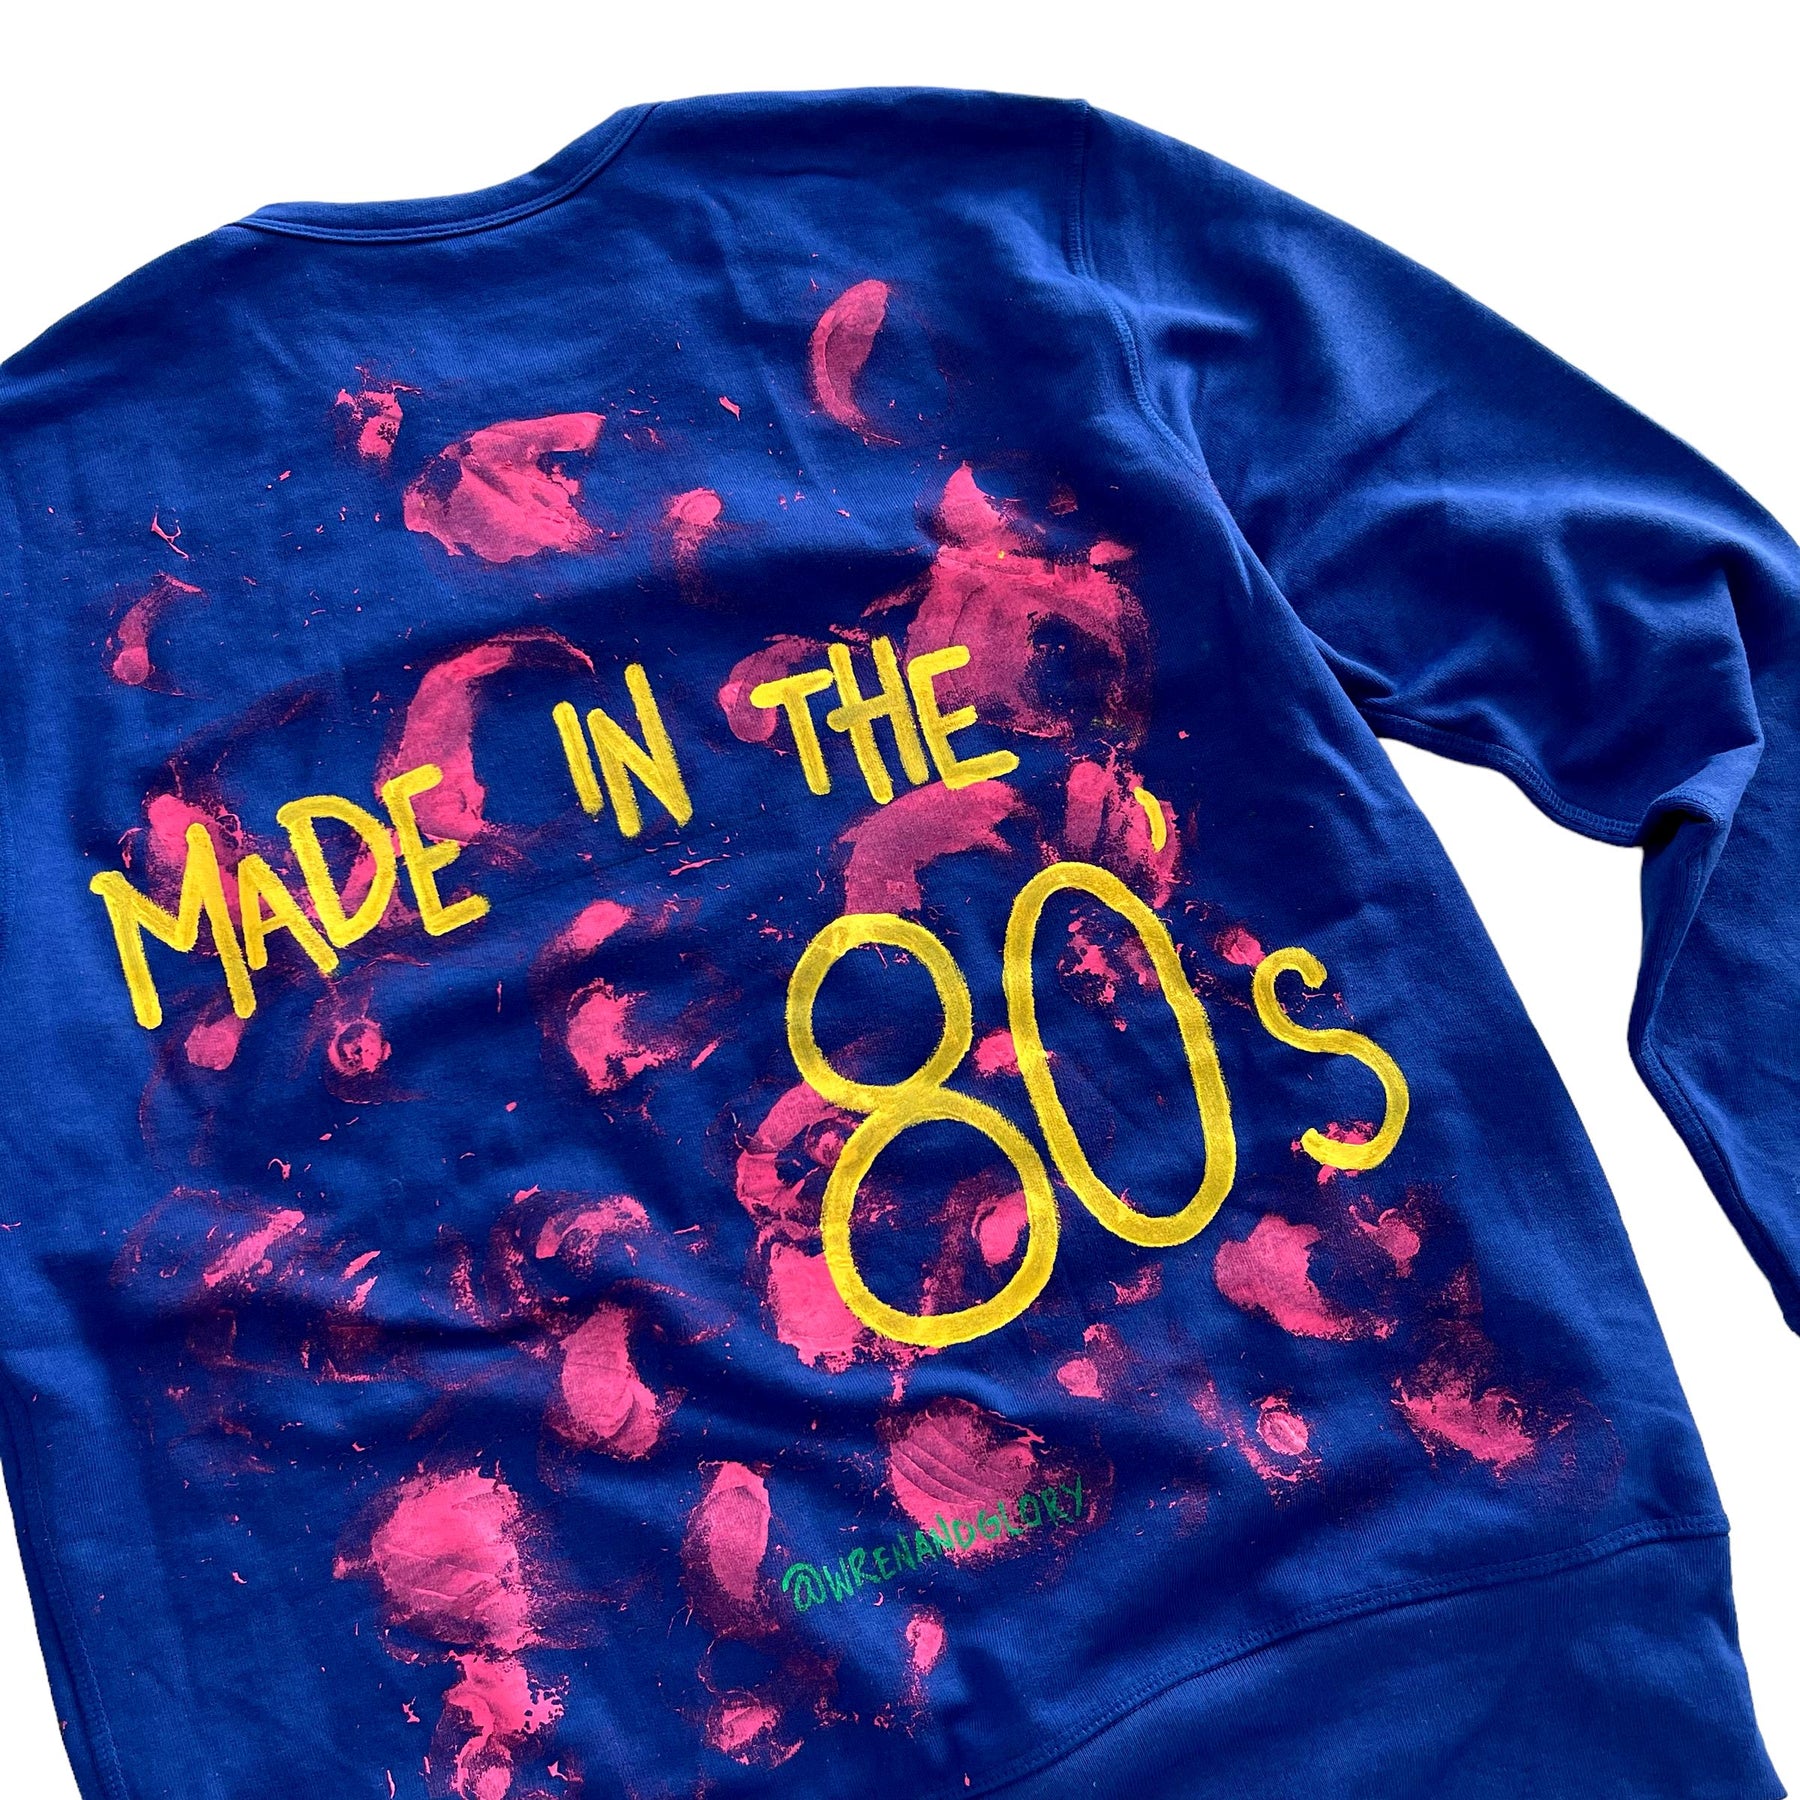 '80s Baby!' Painted Blue Crewneck